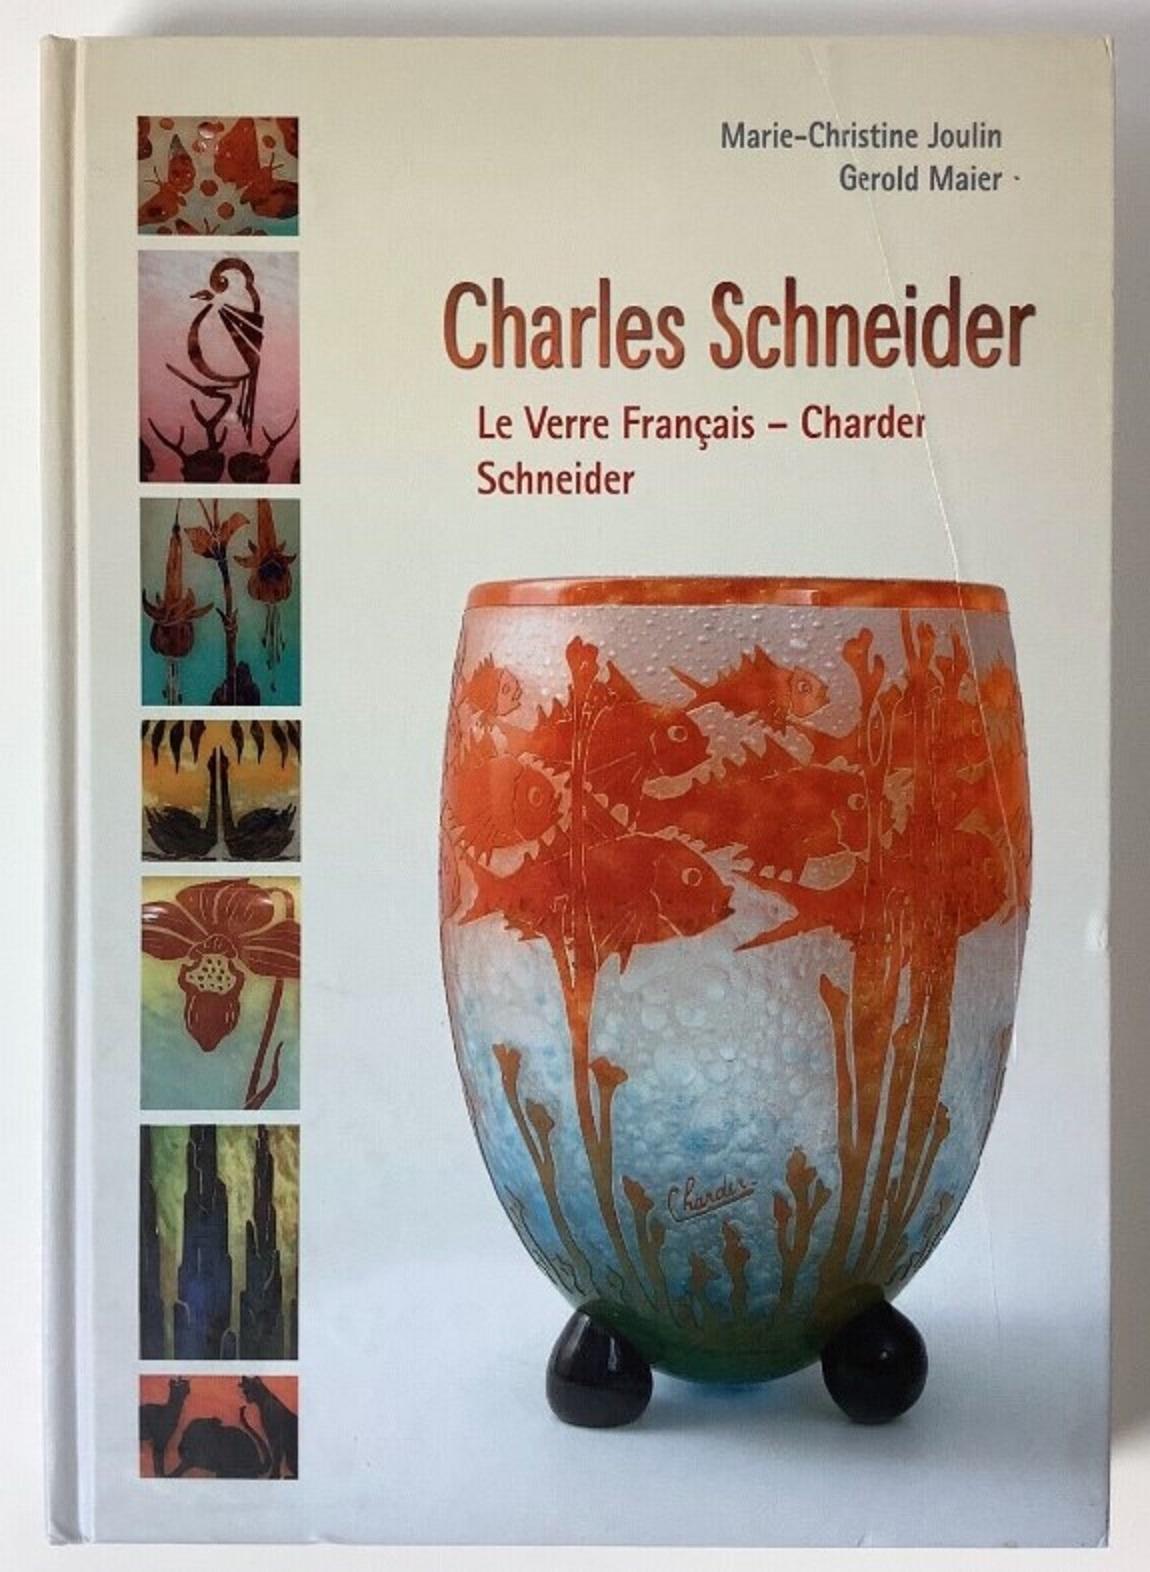 Monumental Vase Sign: Schneider ( Decoración Jade ) with applications
Schneider
Charles Schneider (1881-1953) studied art in two of most prestigious French school of the Arts. First in the School of Fine Arts in Nancy, then in the elite Ecole des